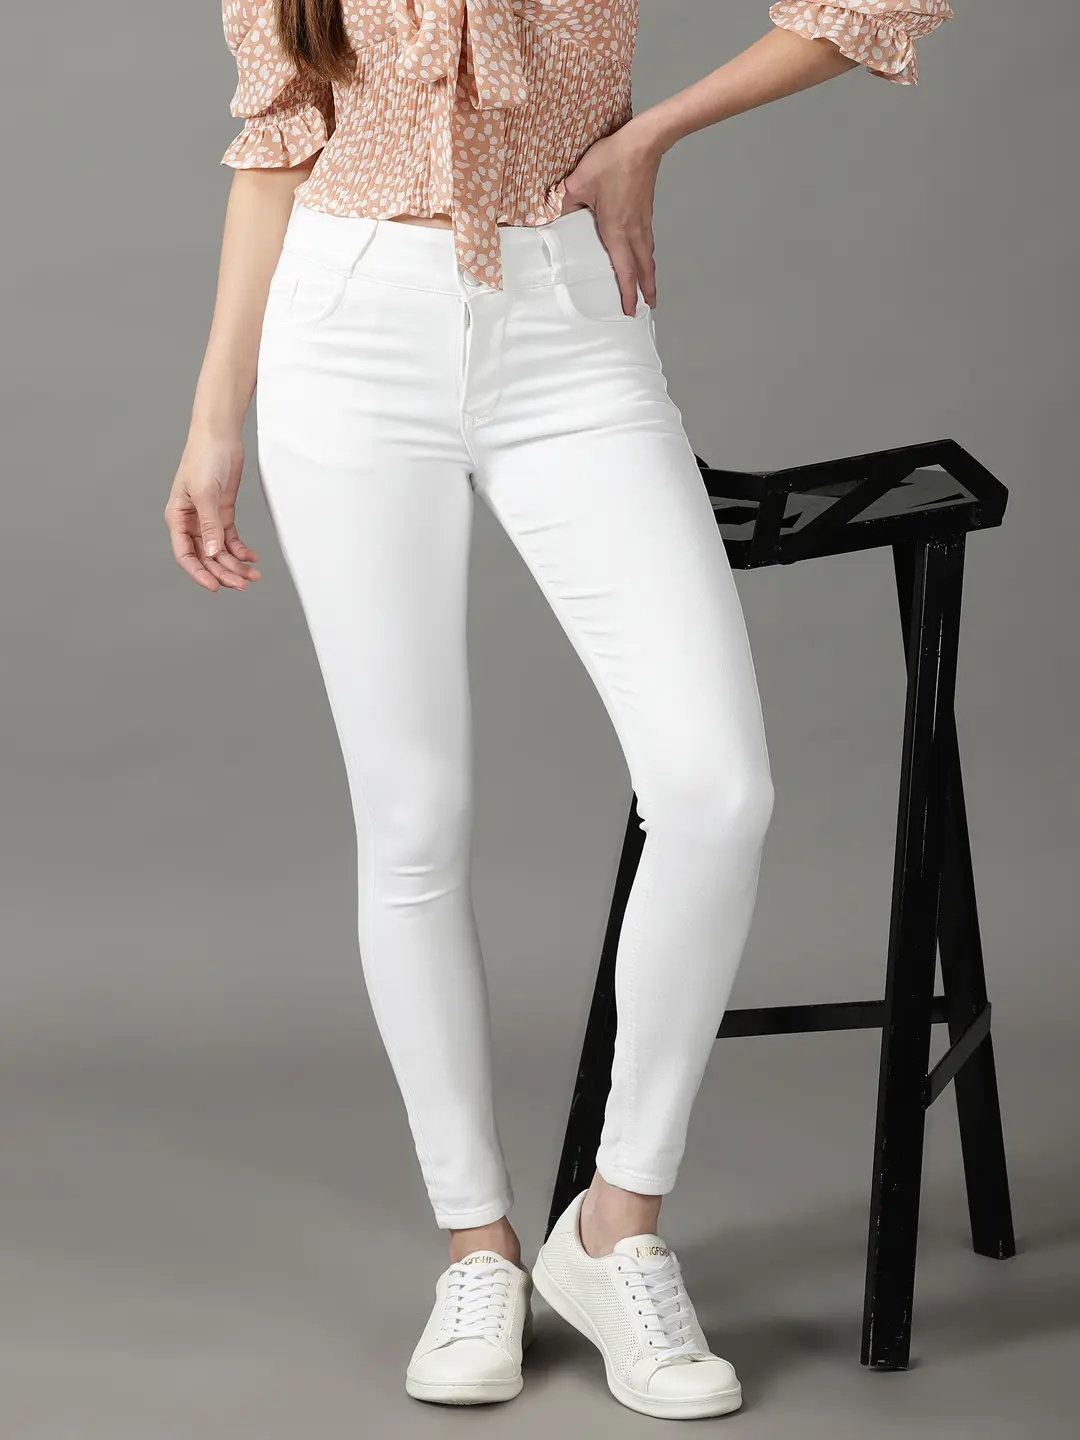 Showoff | SHOWOFF Women's Stretchable Clean Look White Skinny Fit Jeans